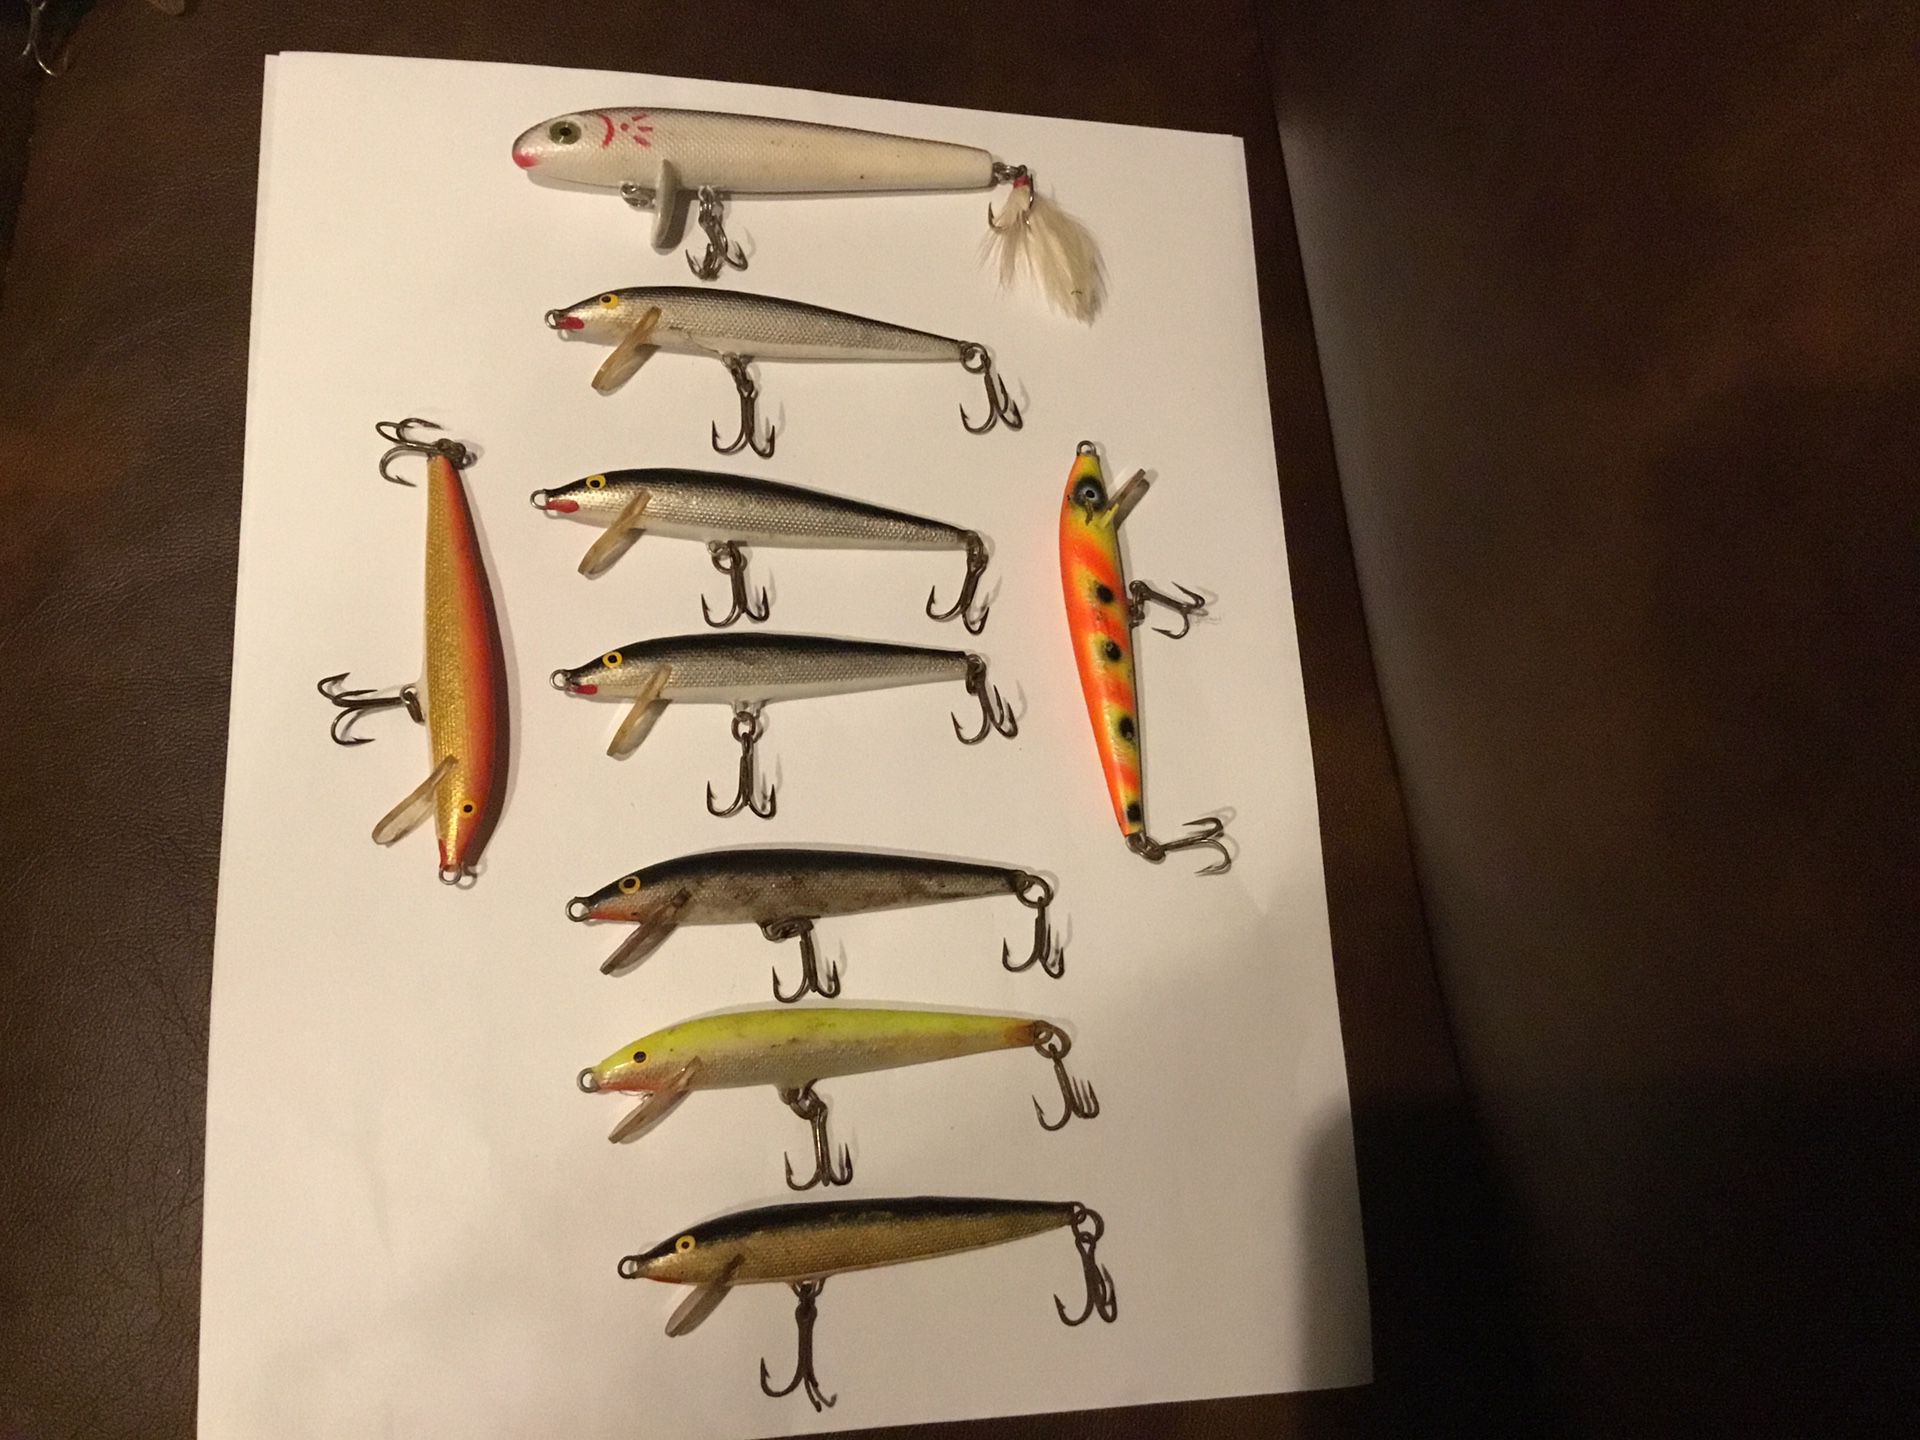 9 assrt size and color crainkbait walleye fishing lures, made in detroit mi in the 1980s